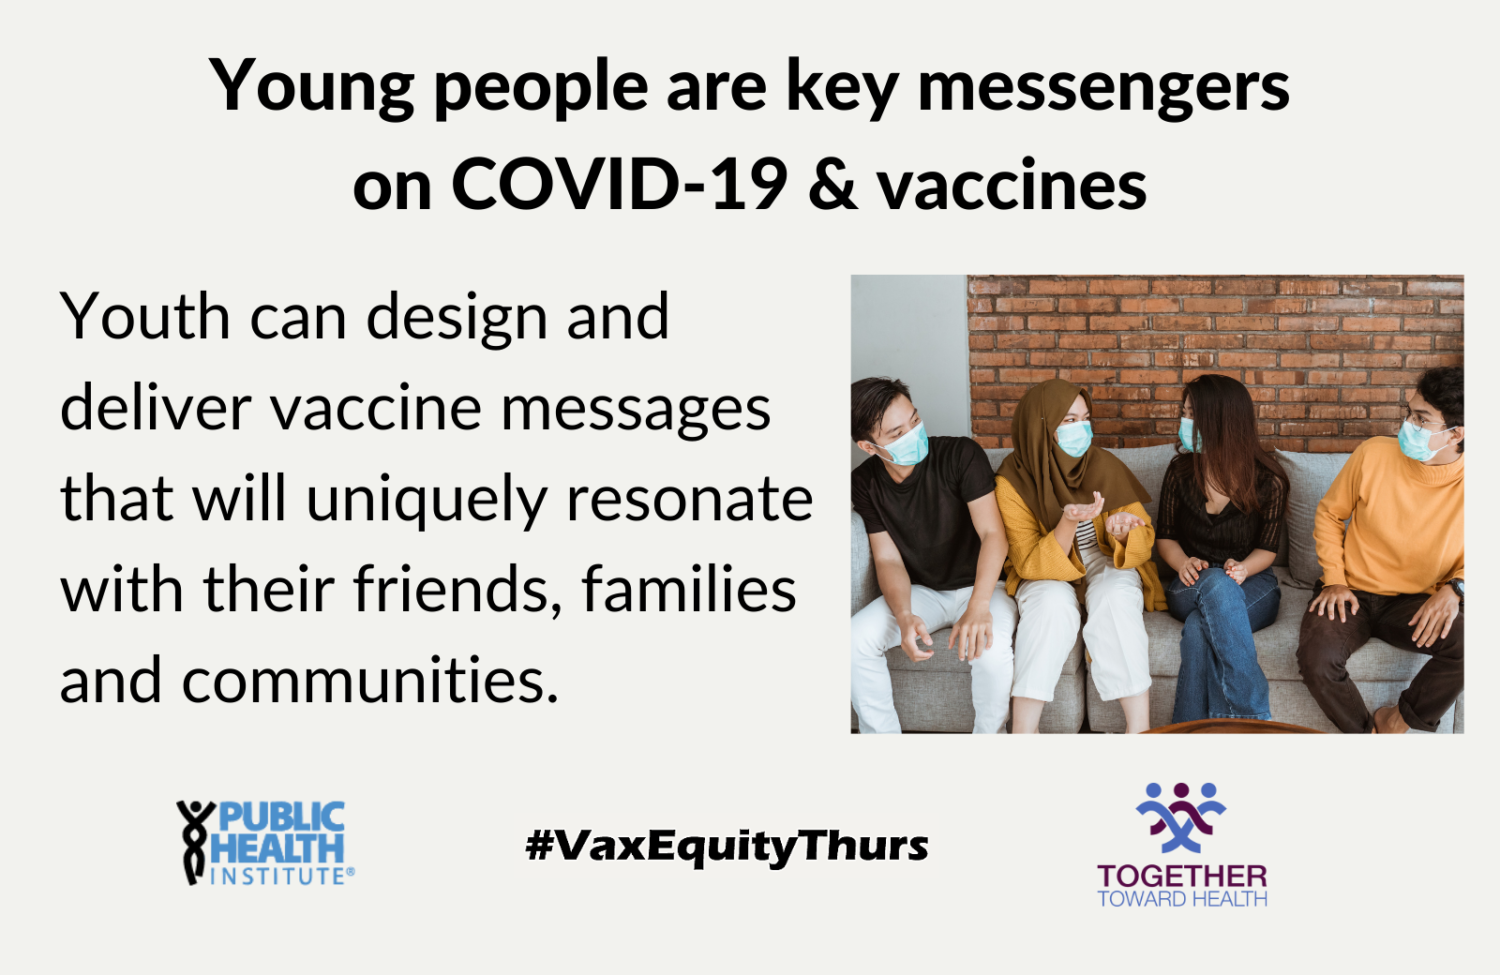 Young people are key messengers on COVID-19 & vaccines